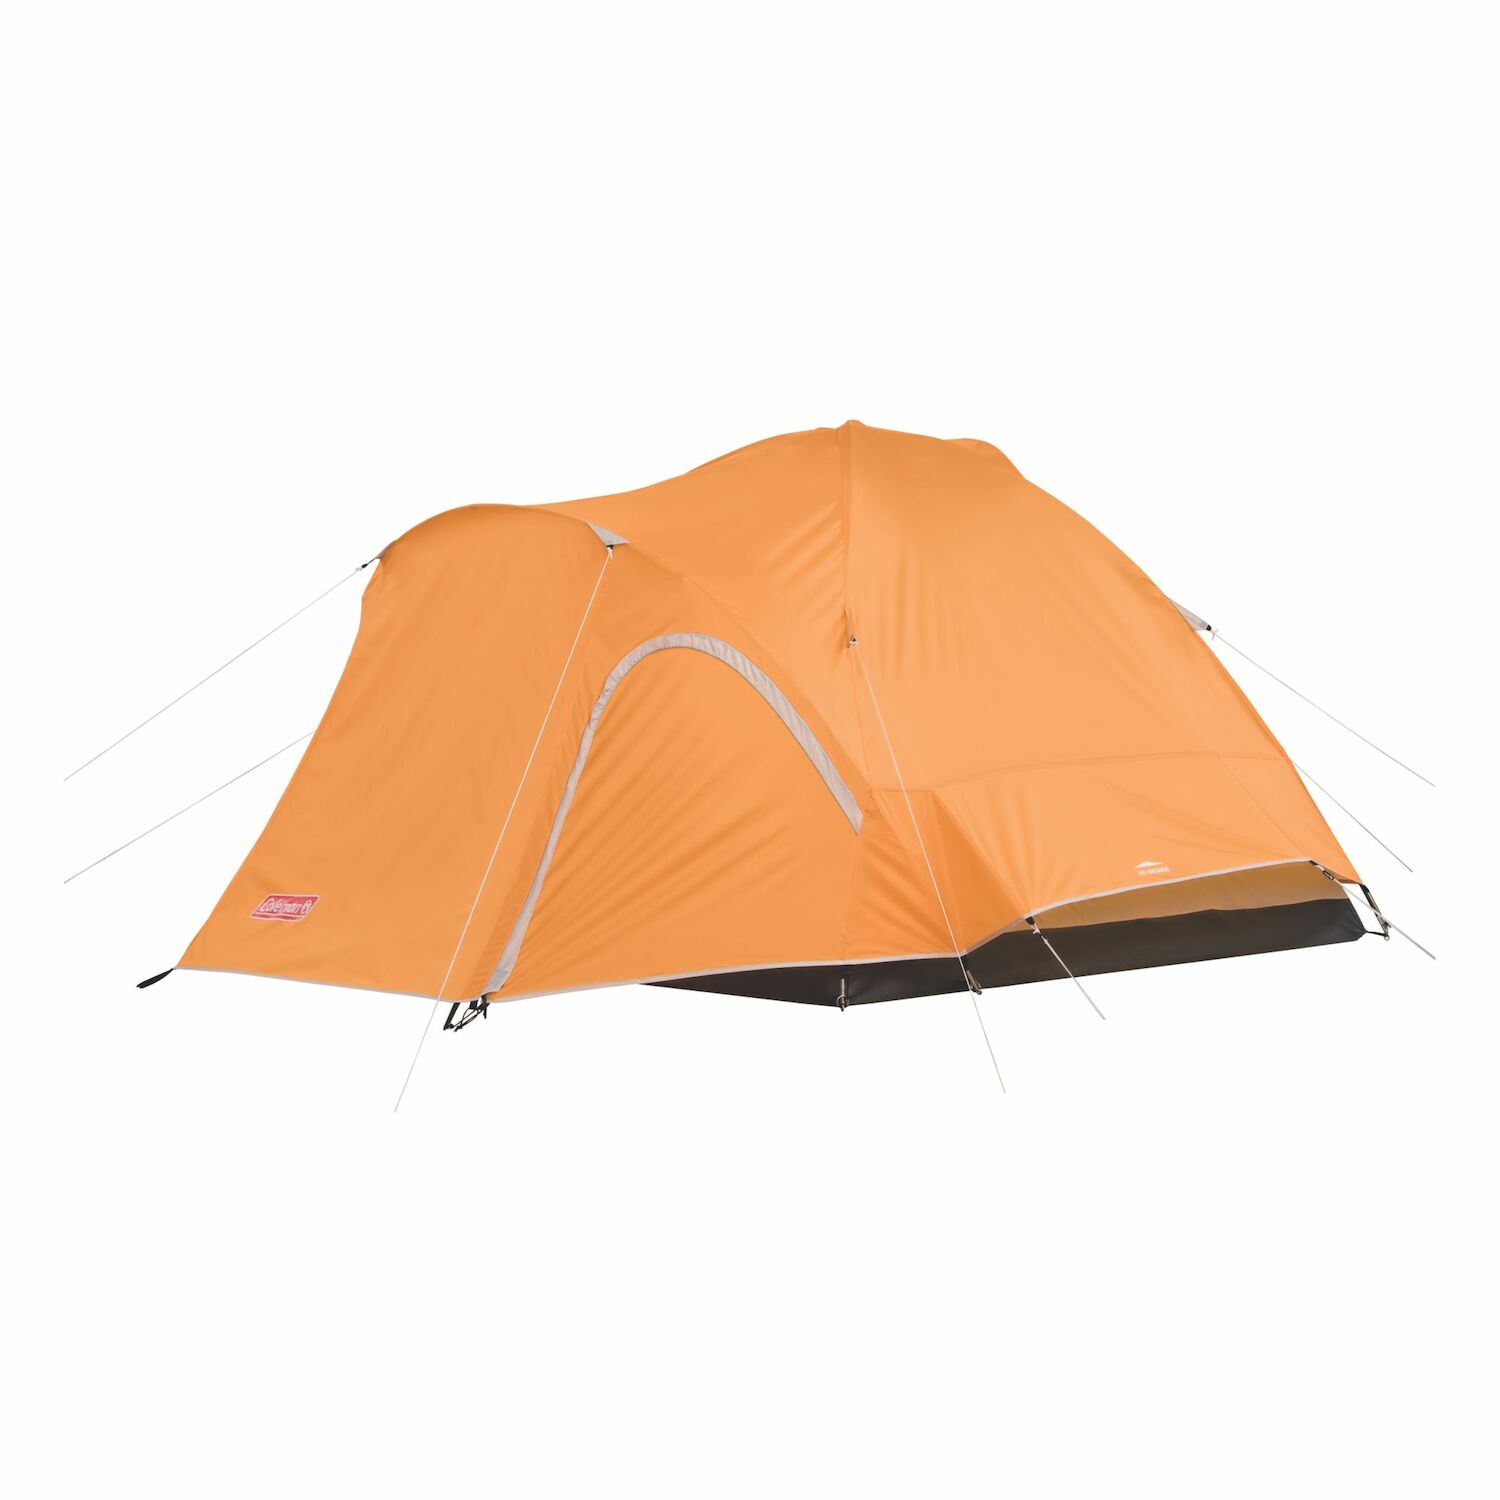 Hooligan 3-Person Backpacking Tent